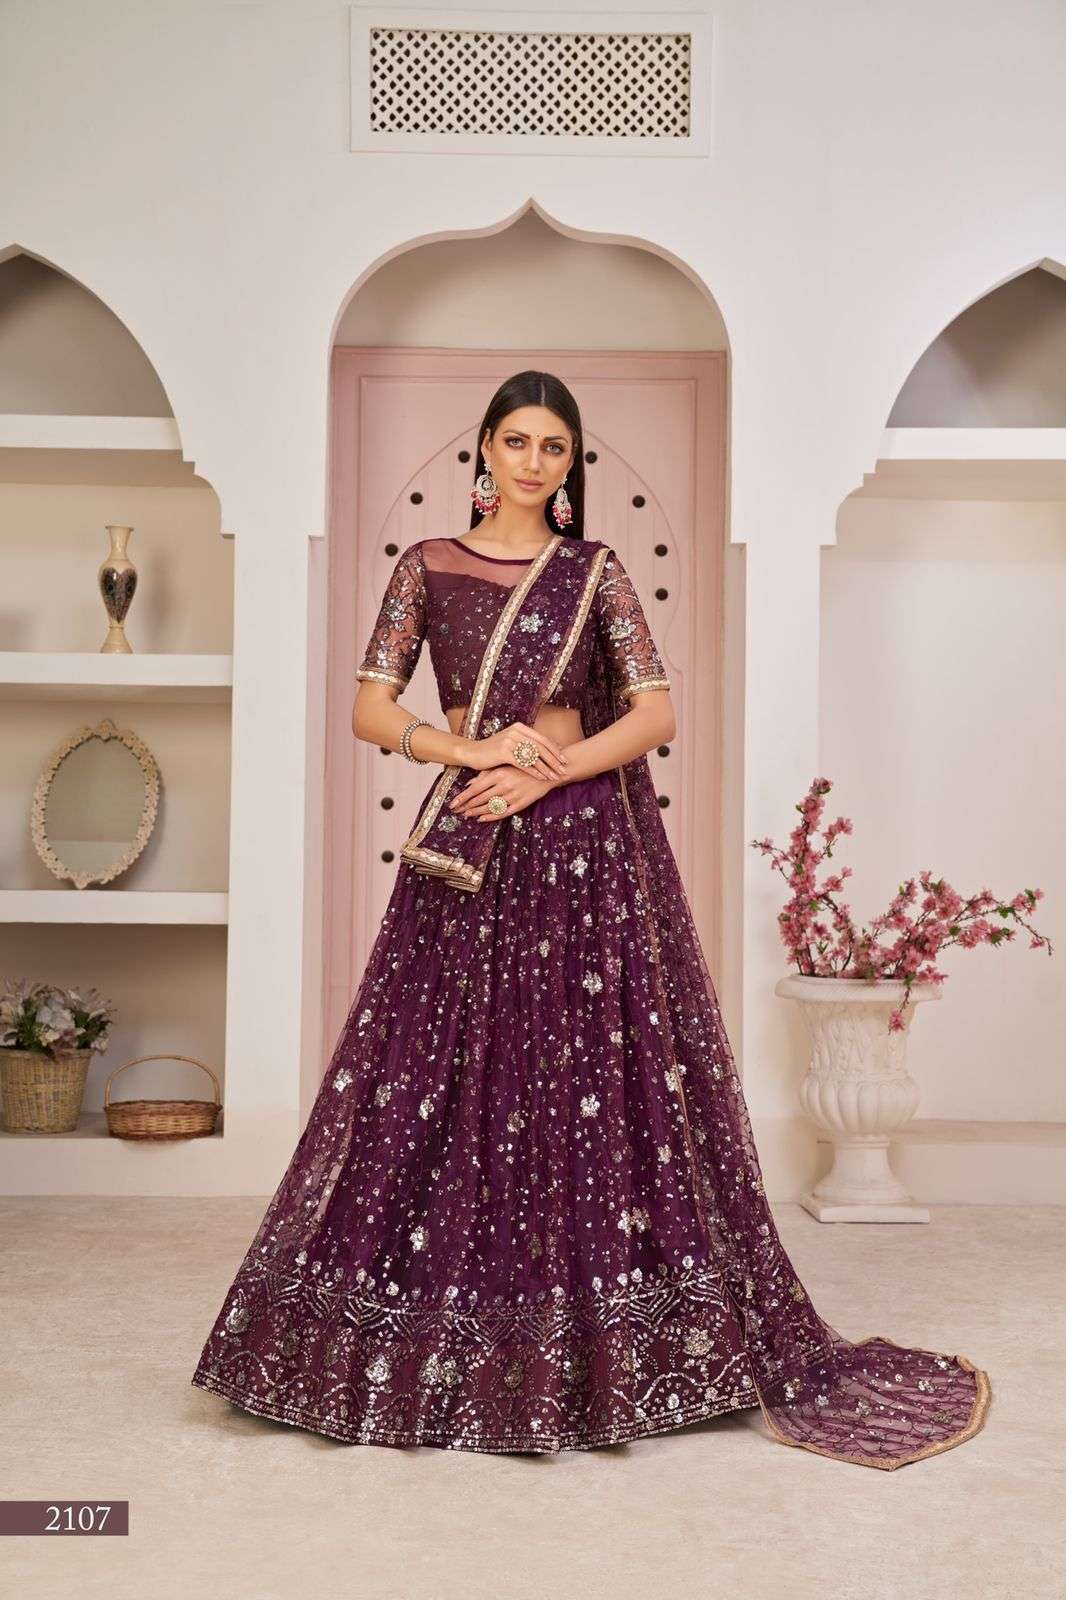 Stylish Lehenga Choli Design to Stand Out at Your Next Event